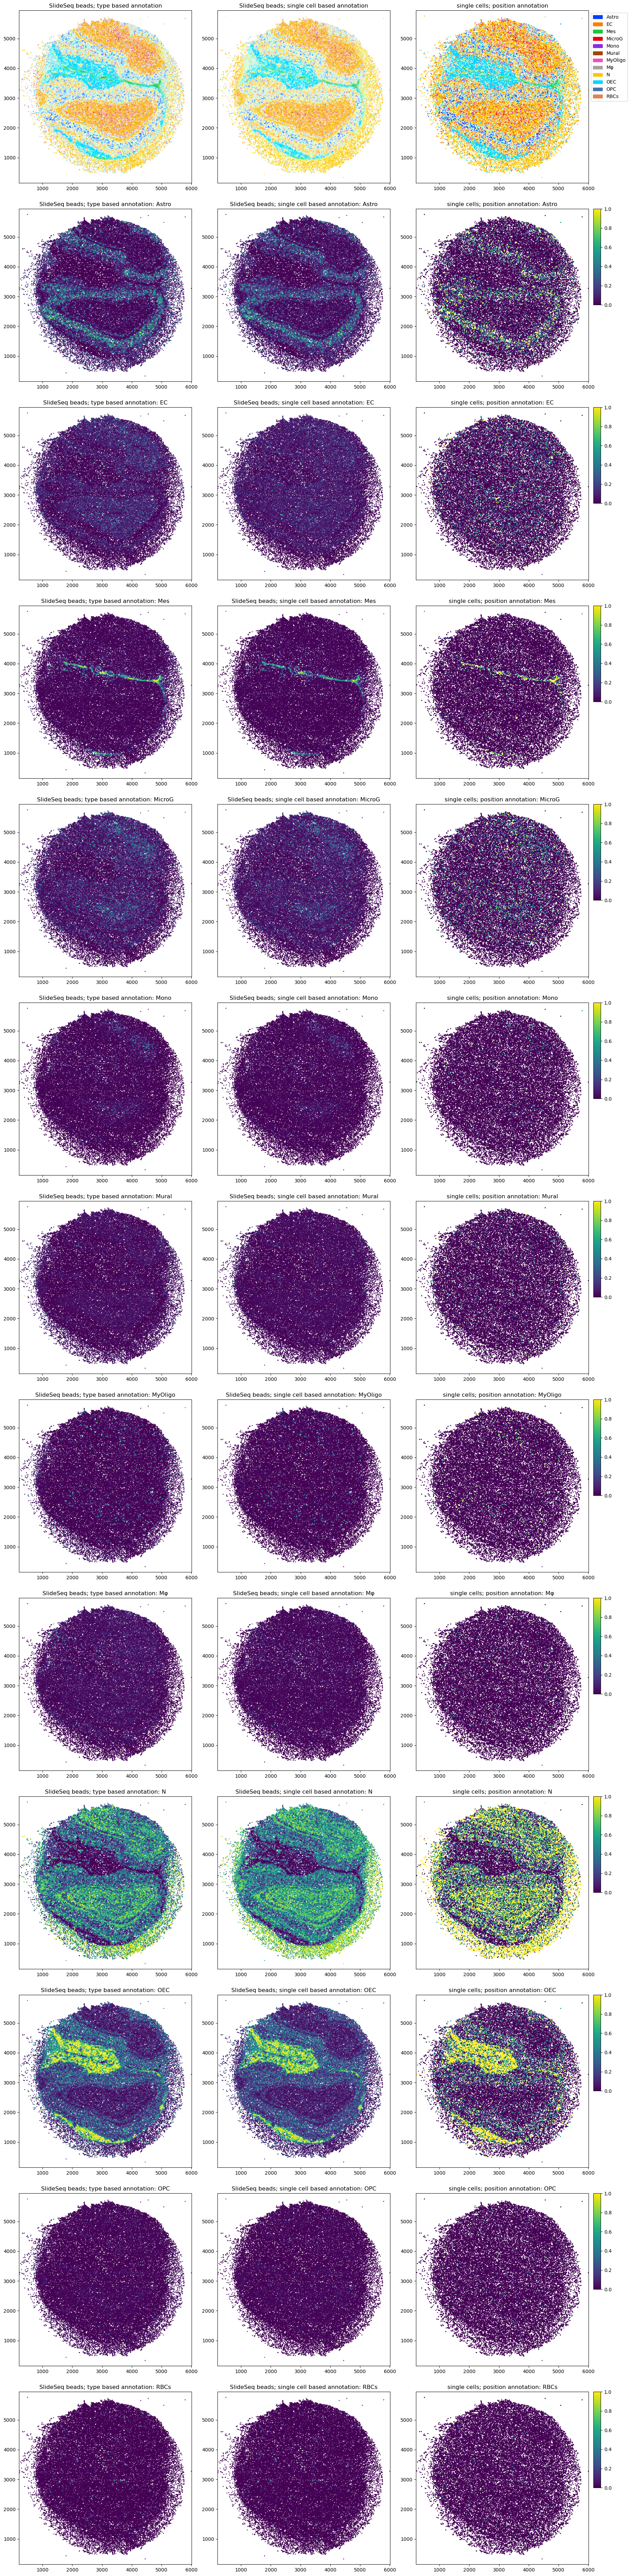 ../_images/notebooks_mapping_single_cells_into_space_26_0.png